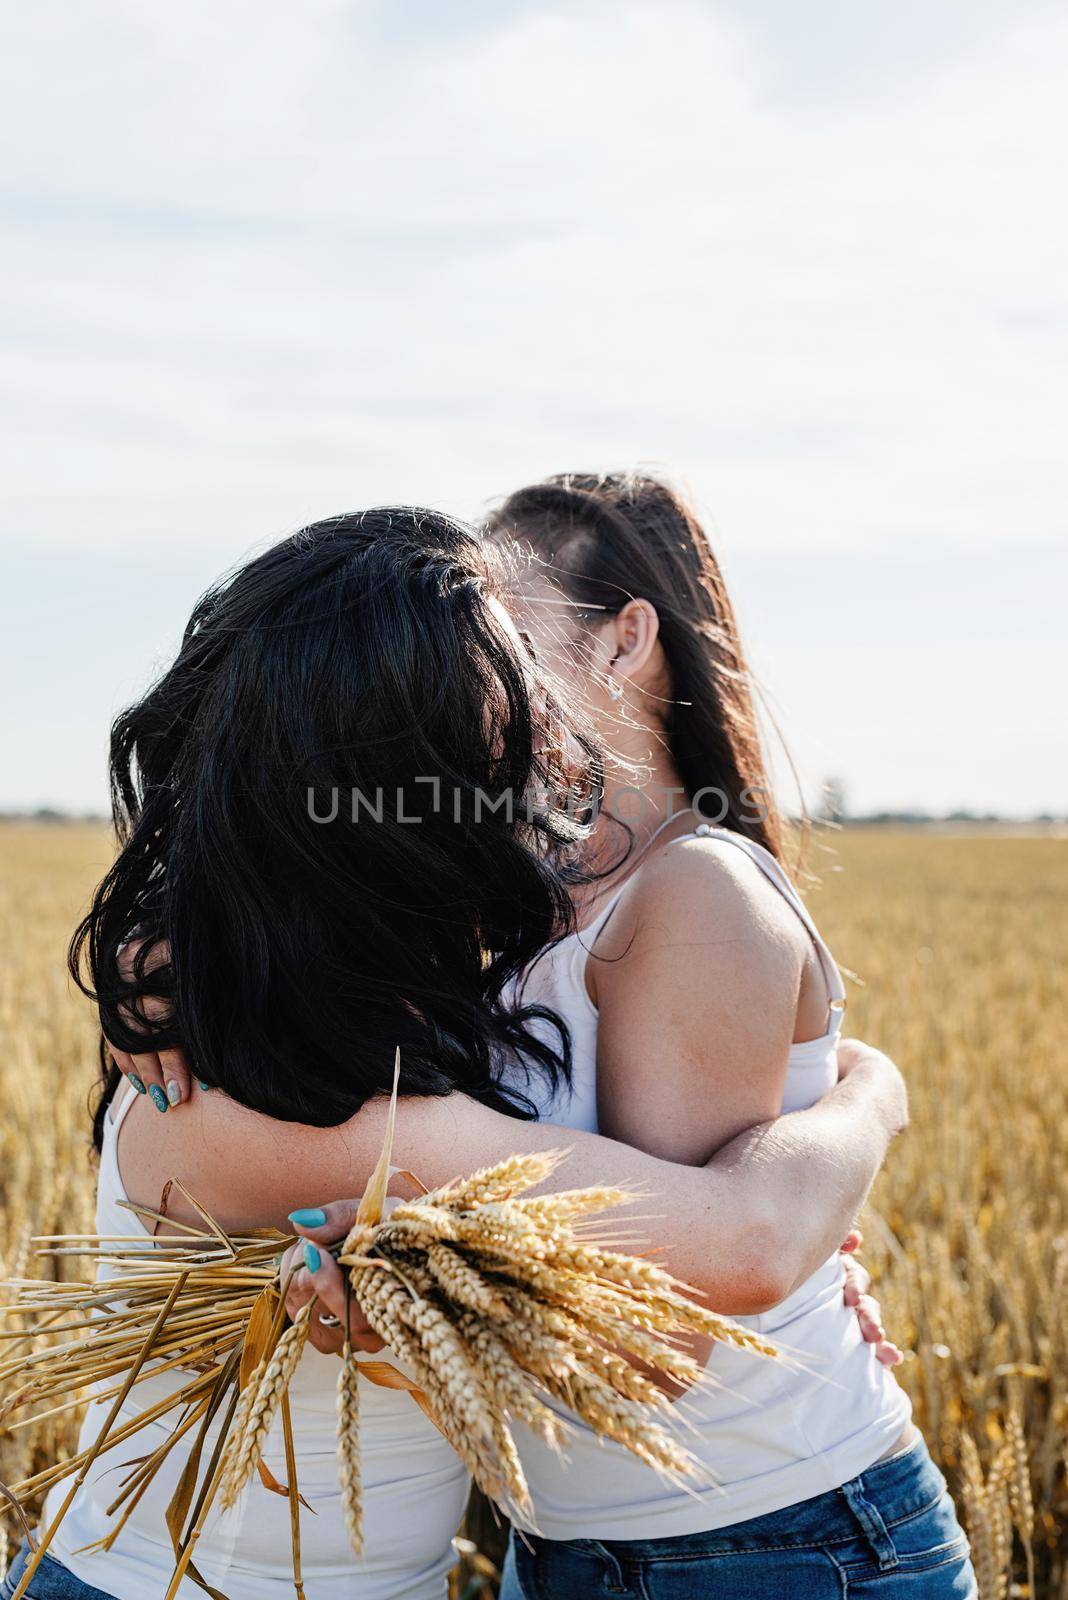 Two smiling female friends in the wheat field by Desperada